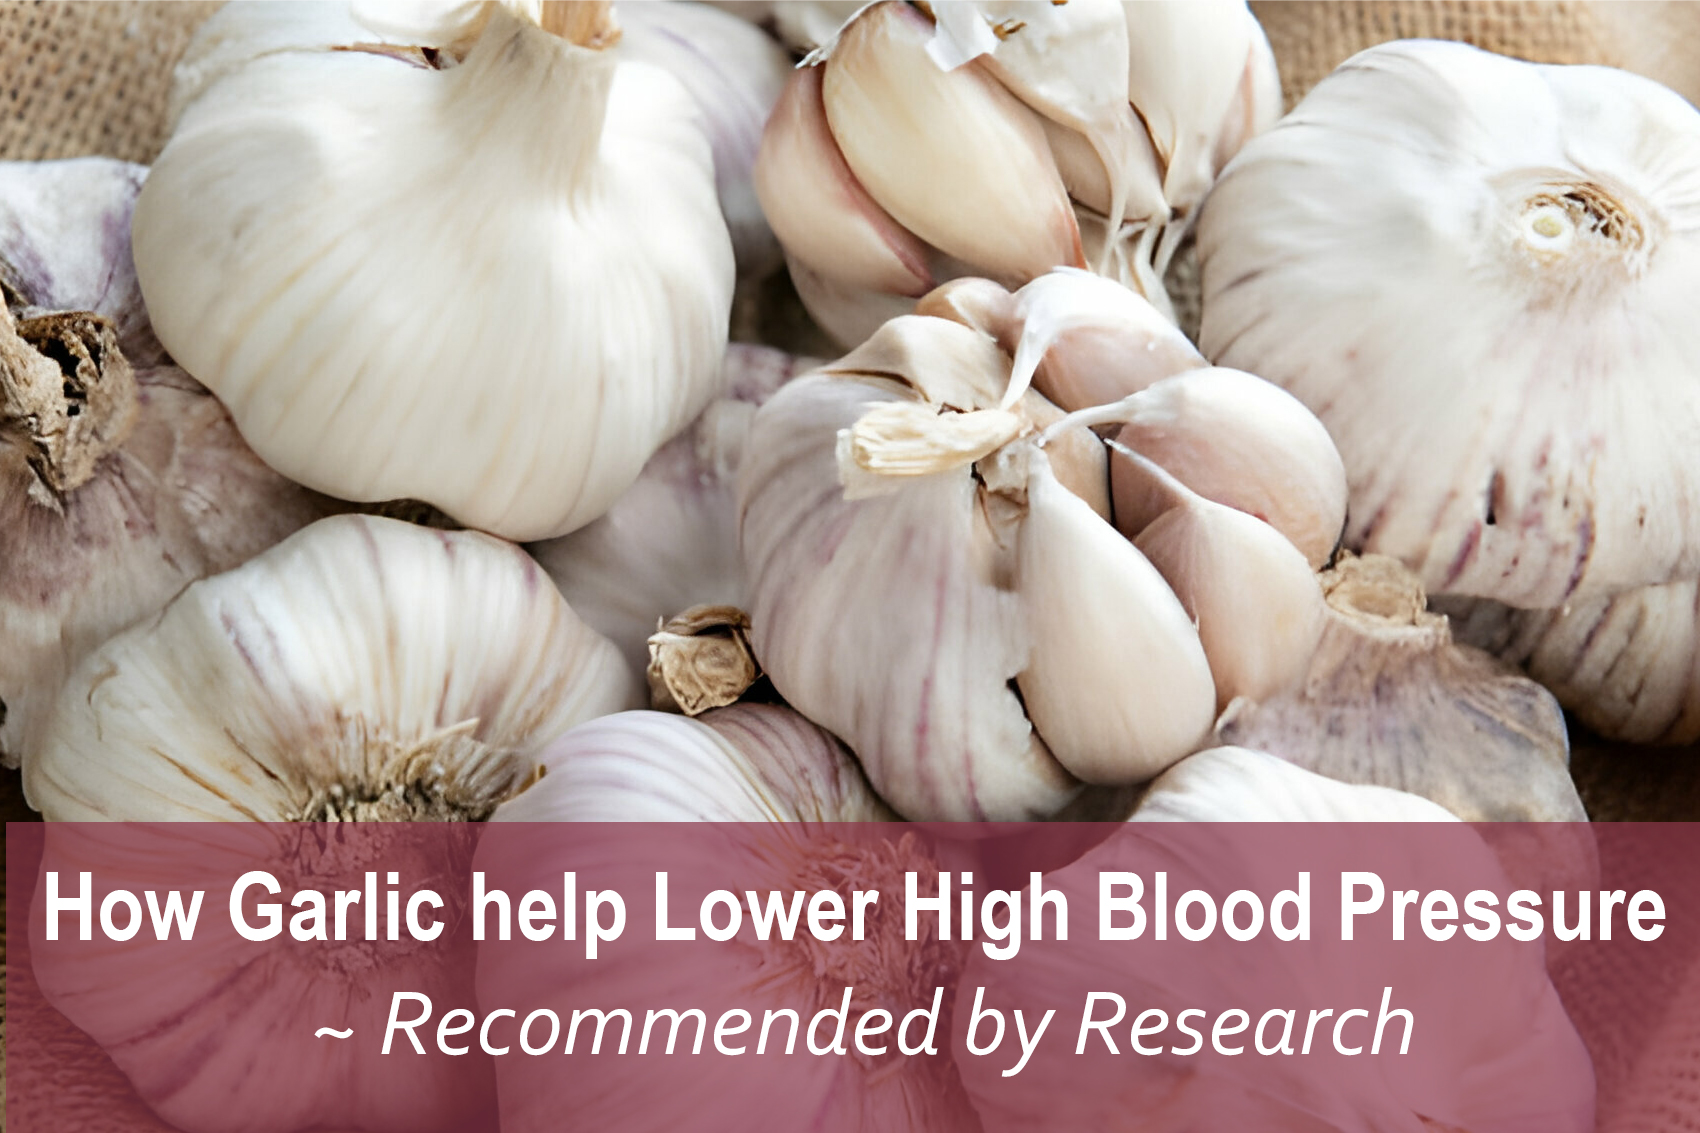 How Garlic Help Lower High Blood Pressure, Recommended by Research